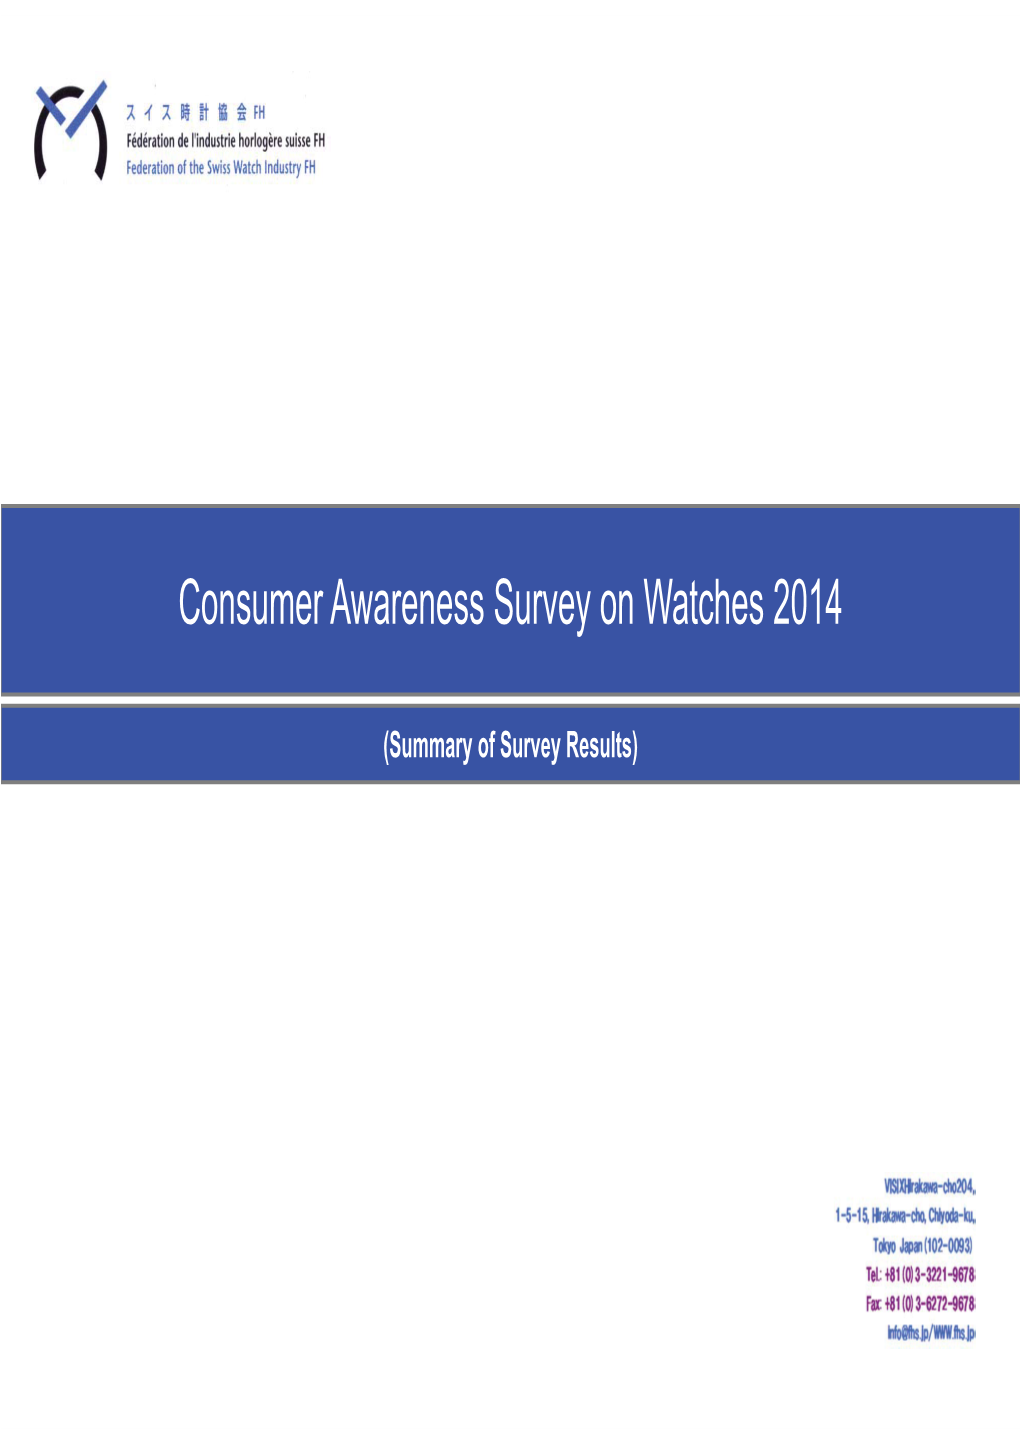 Consumer Awareness Survey on Watches 2014